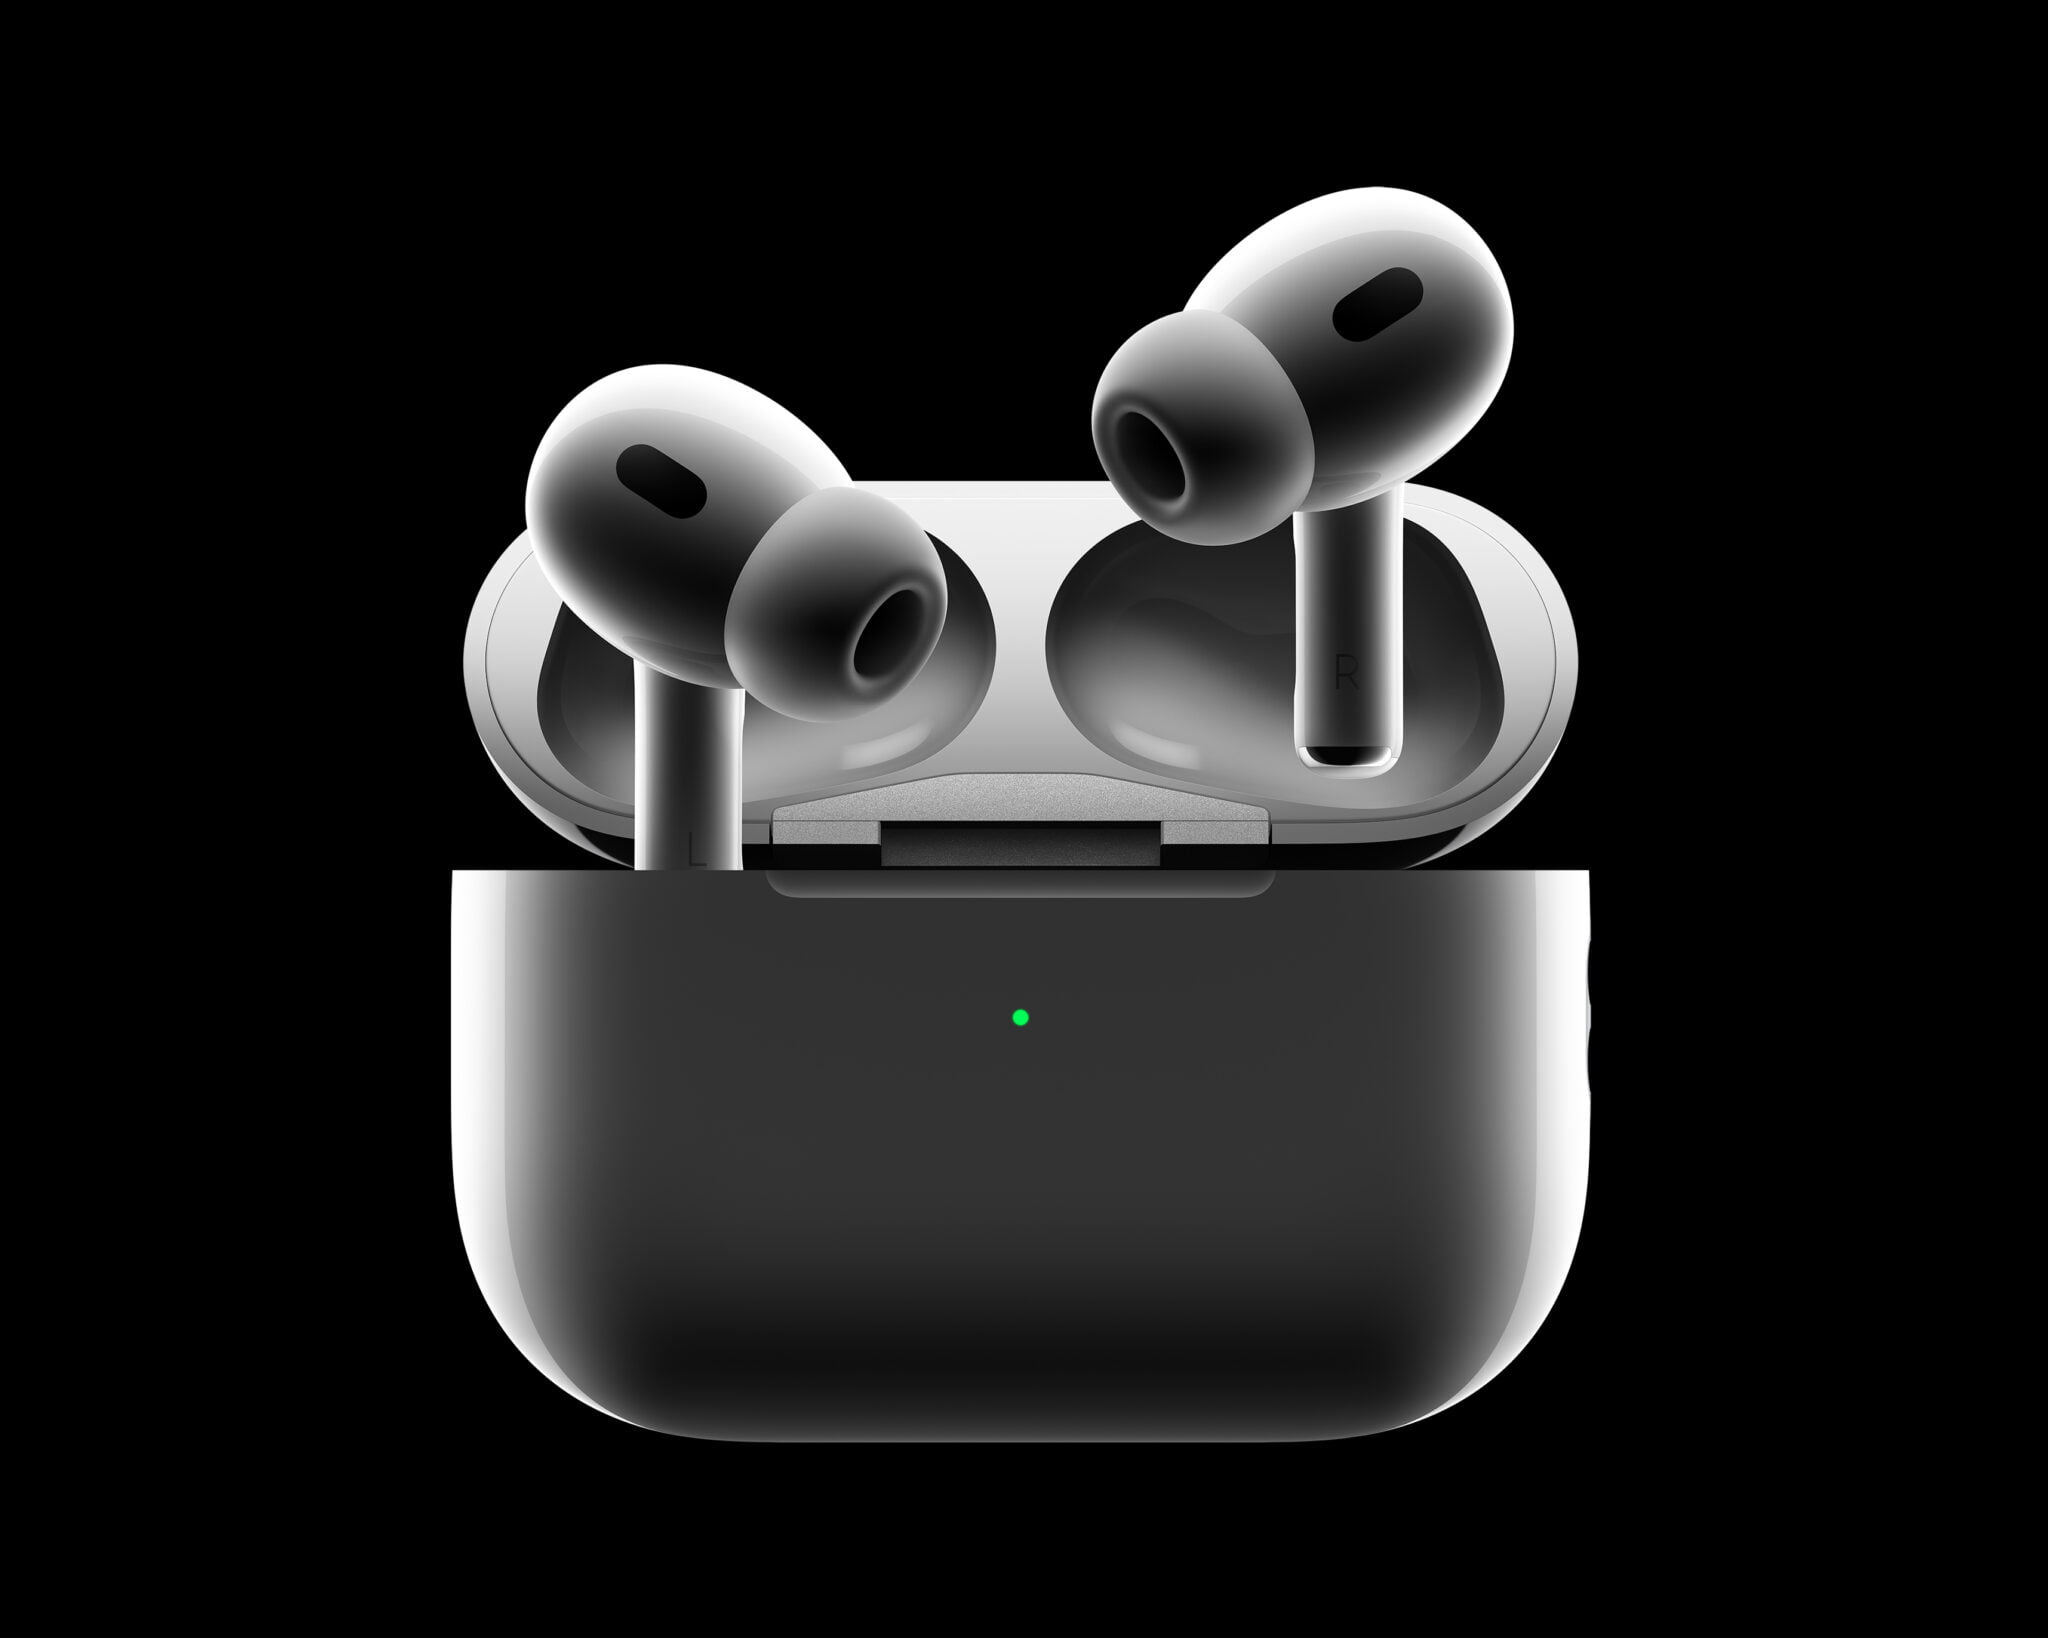 AirPods Pro vs AirPods Pro 2 – which Apple headphones should you choose?